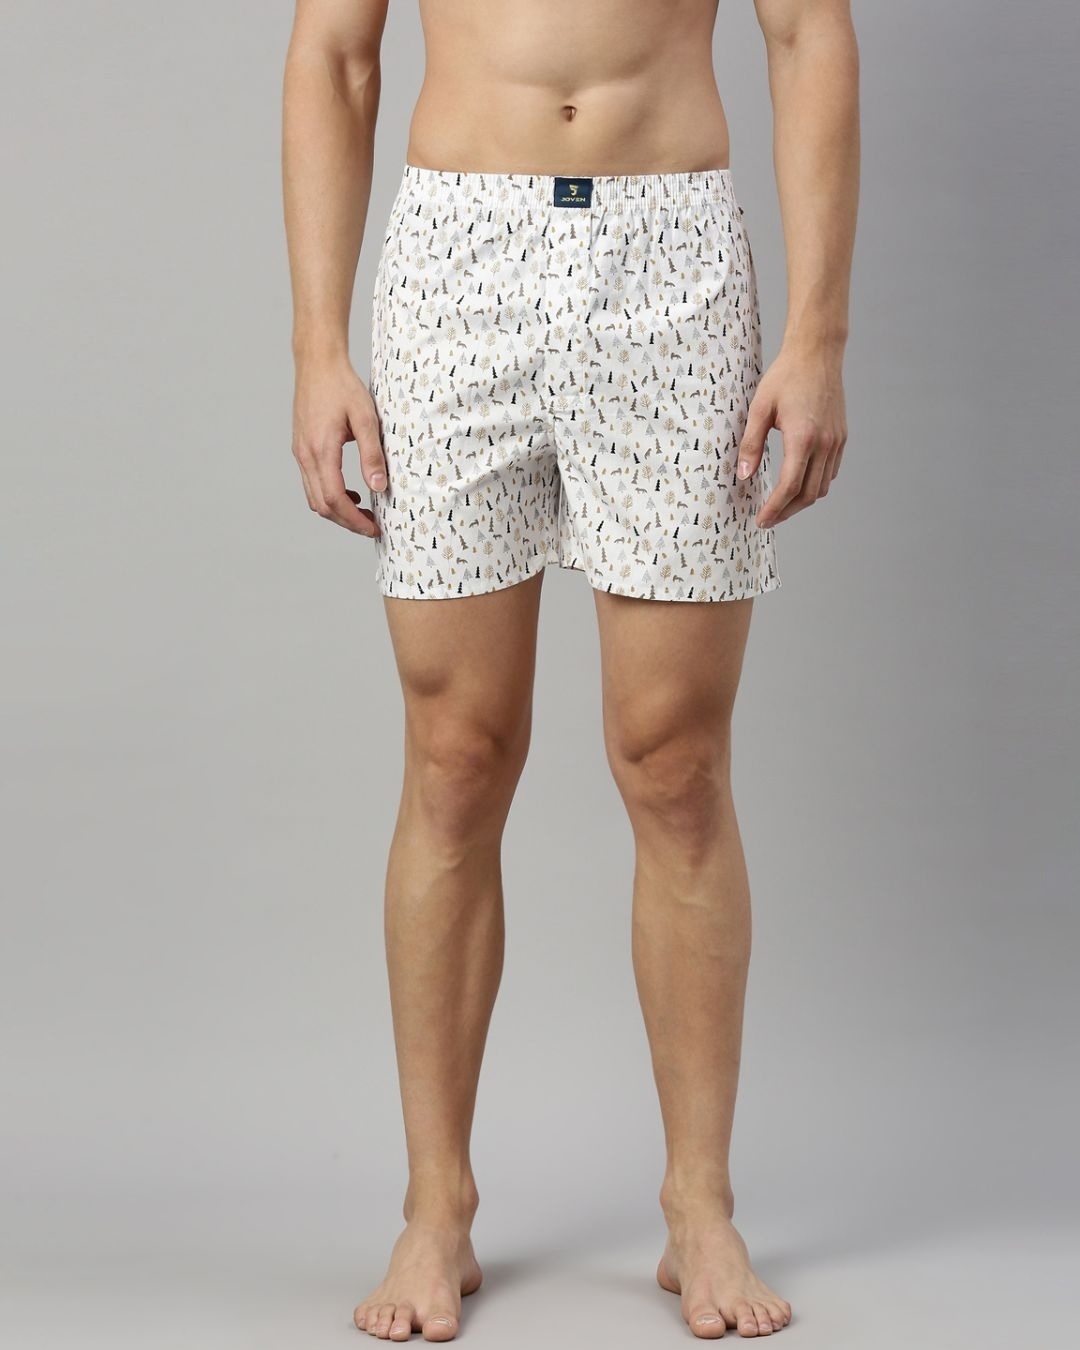 Shop Men's All Over Printed Cotton Boxers (Pack of 3)